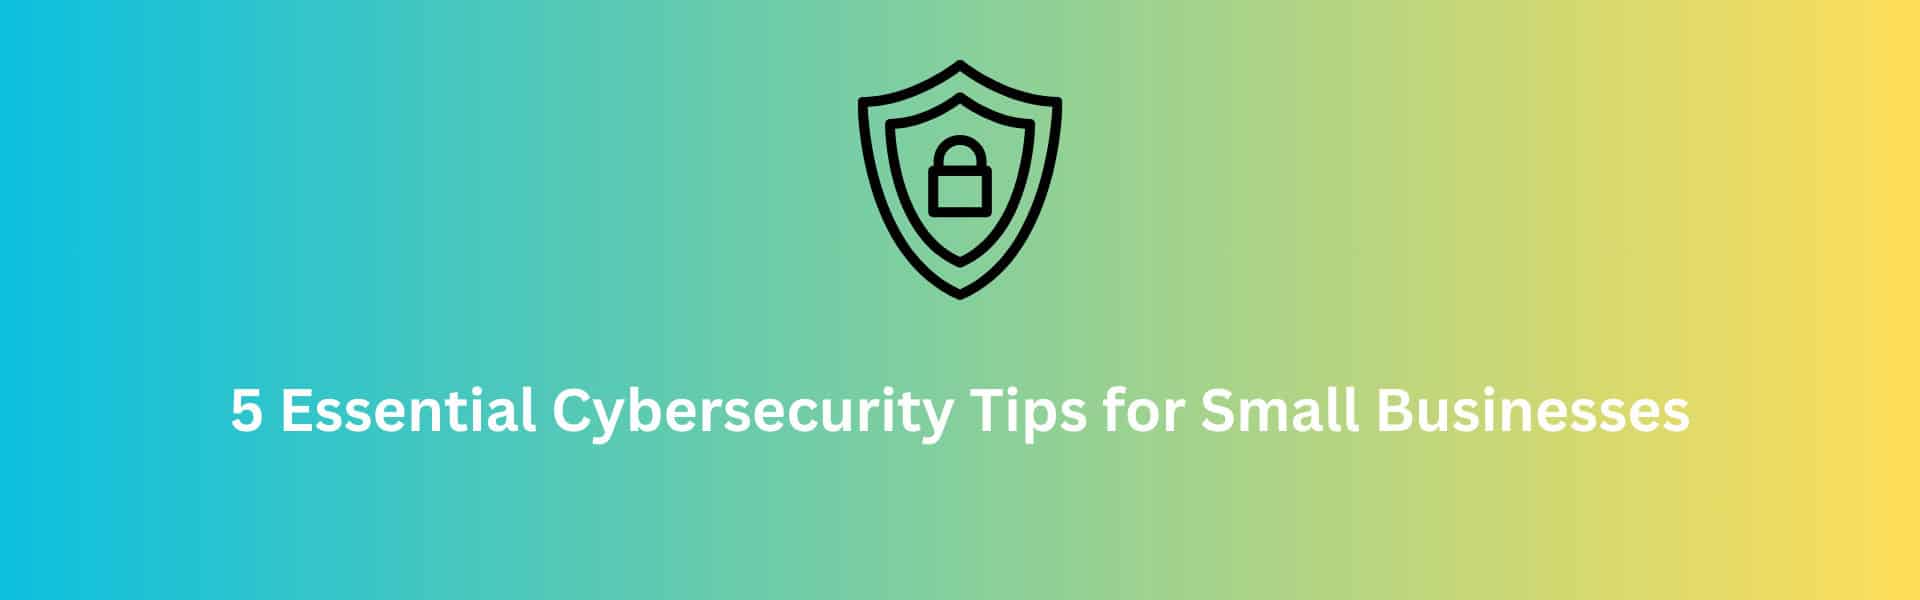 5-Essential-Cybersecurity-Tips-for-Small-Businesses